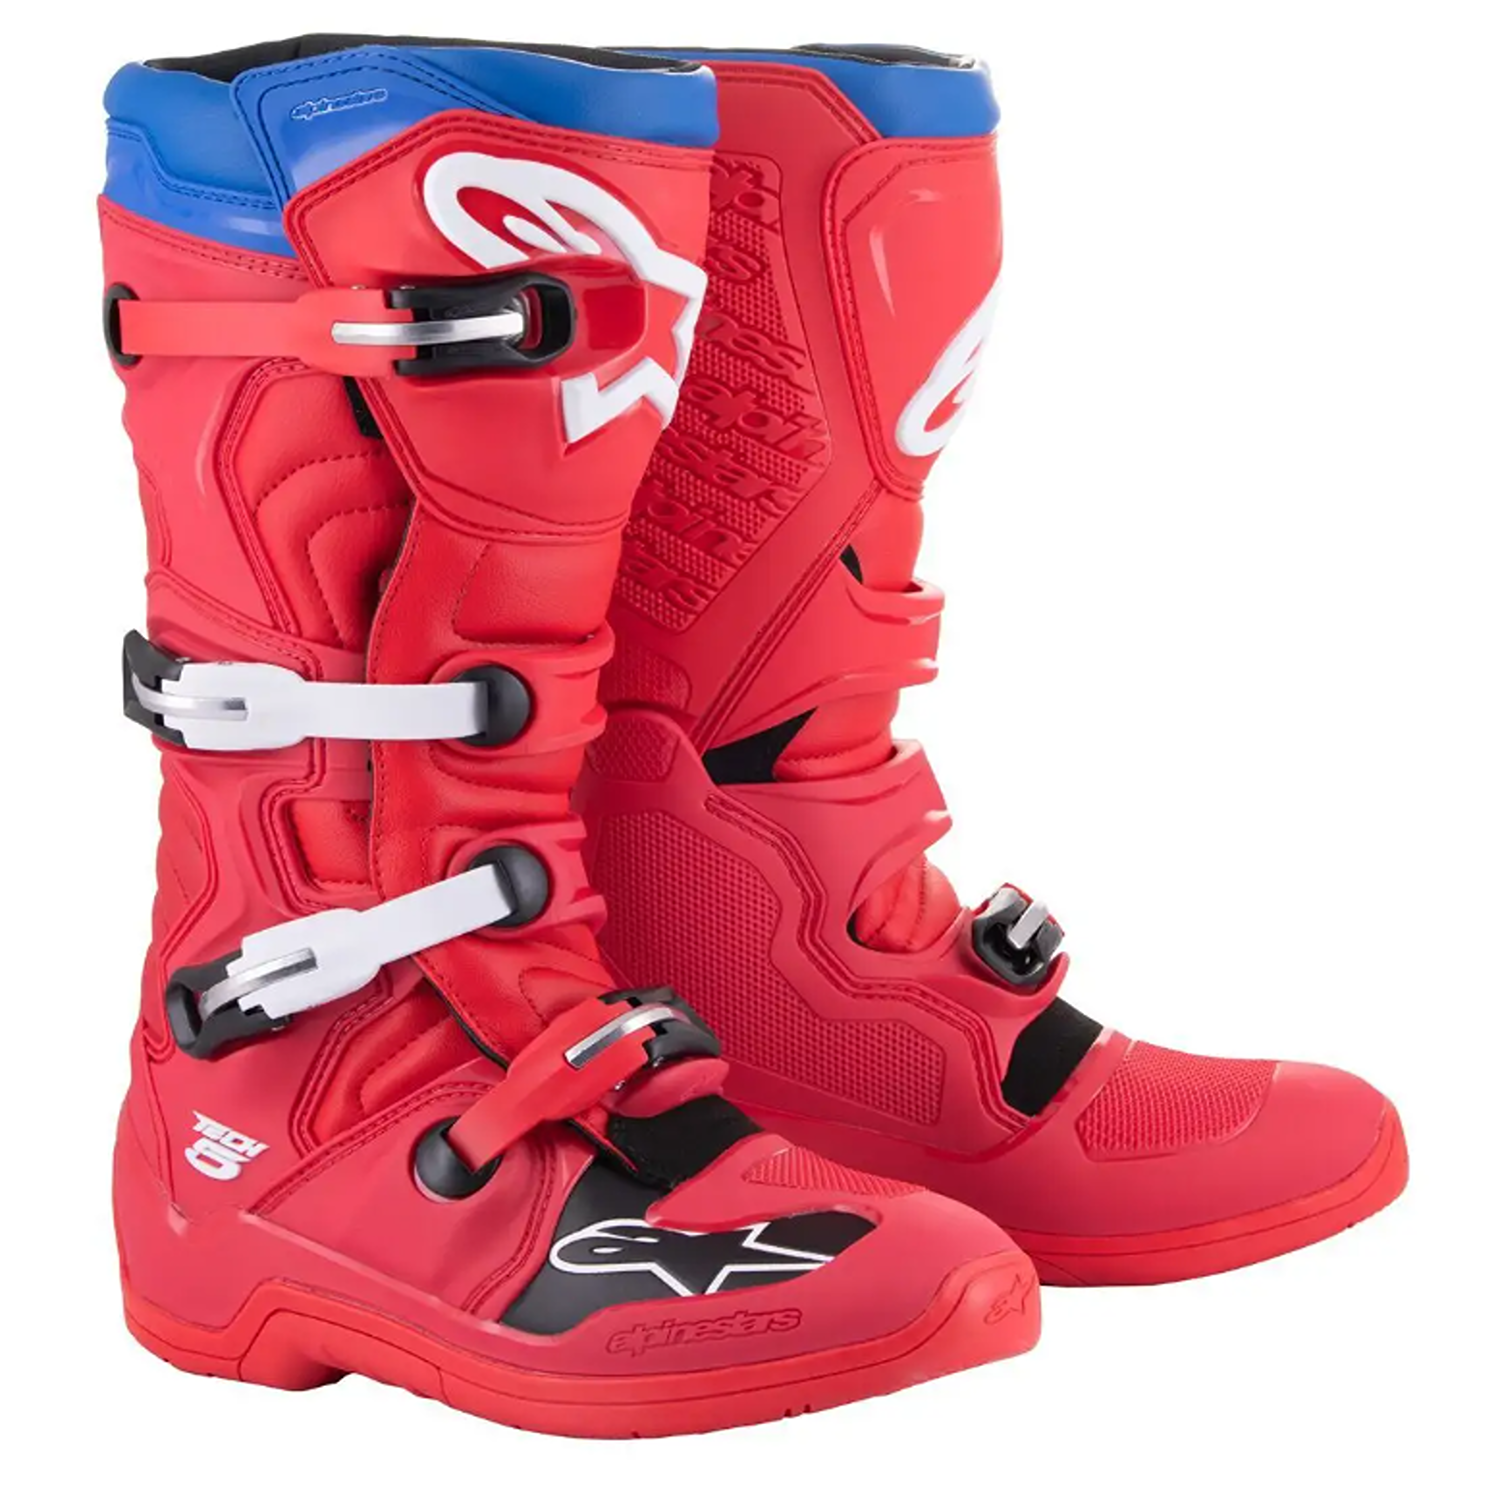 Image of EU Alpinestars Tech 5 Boots Bright Red Dark Red Blue Taille US 13